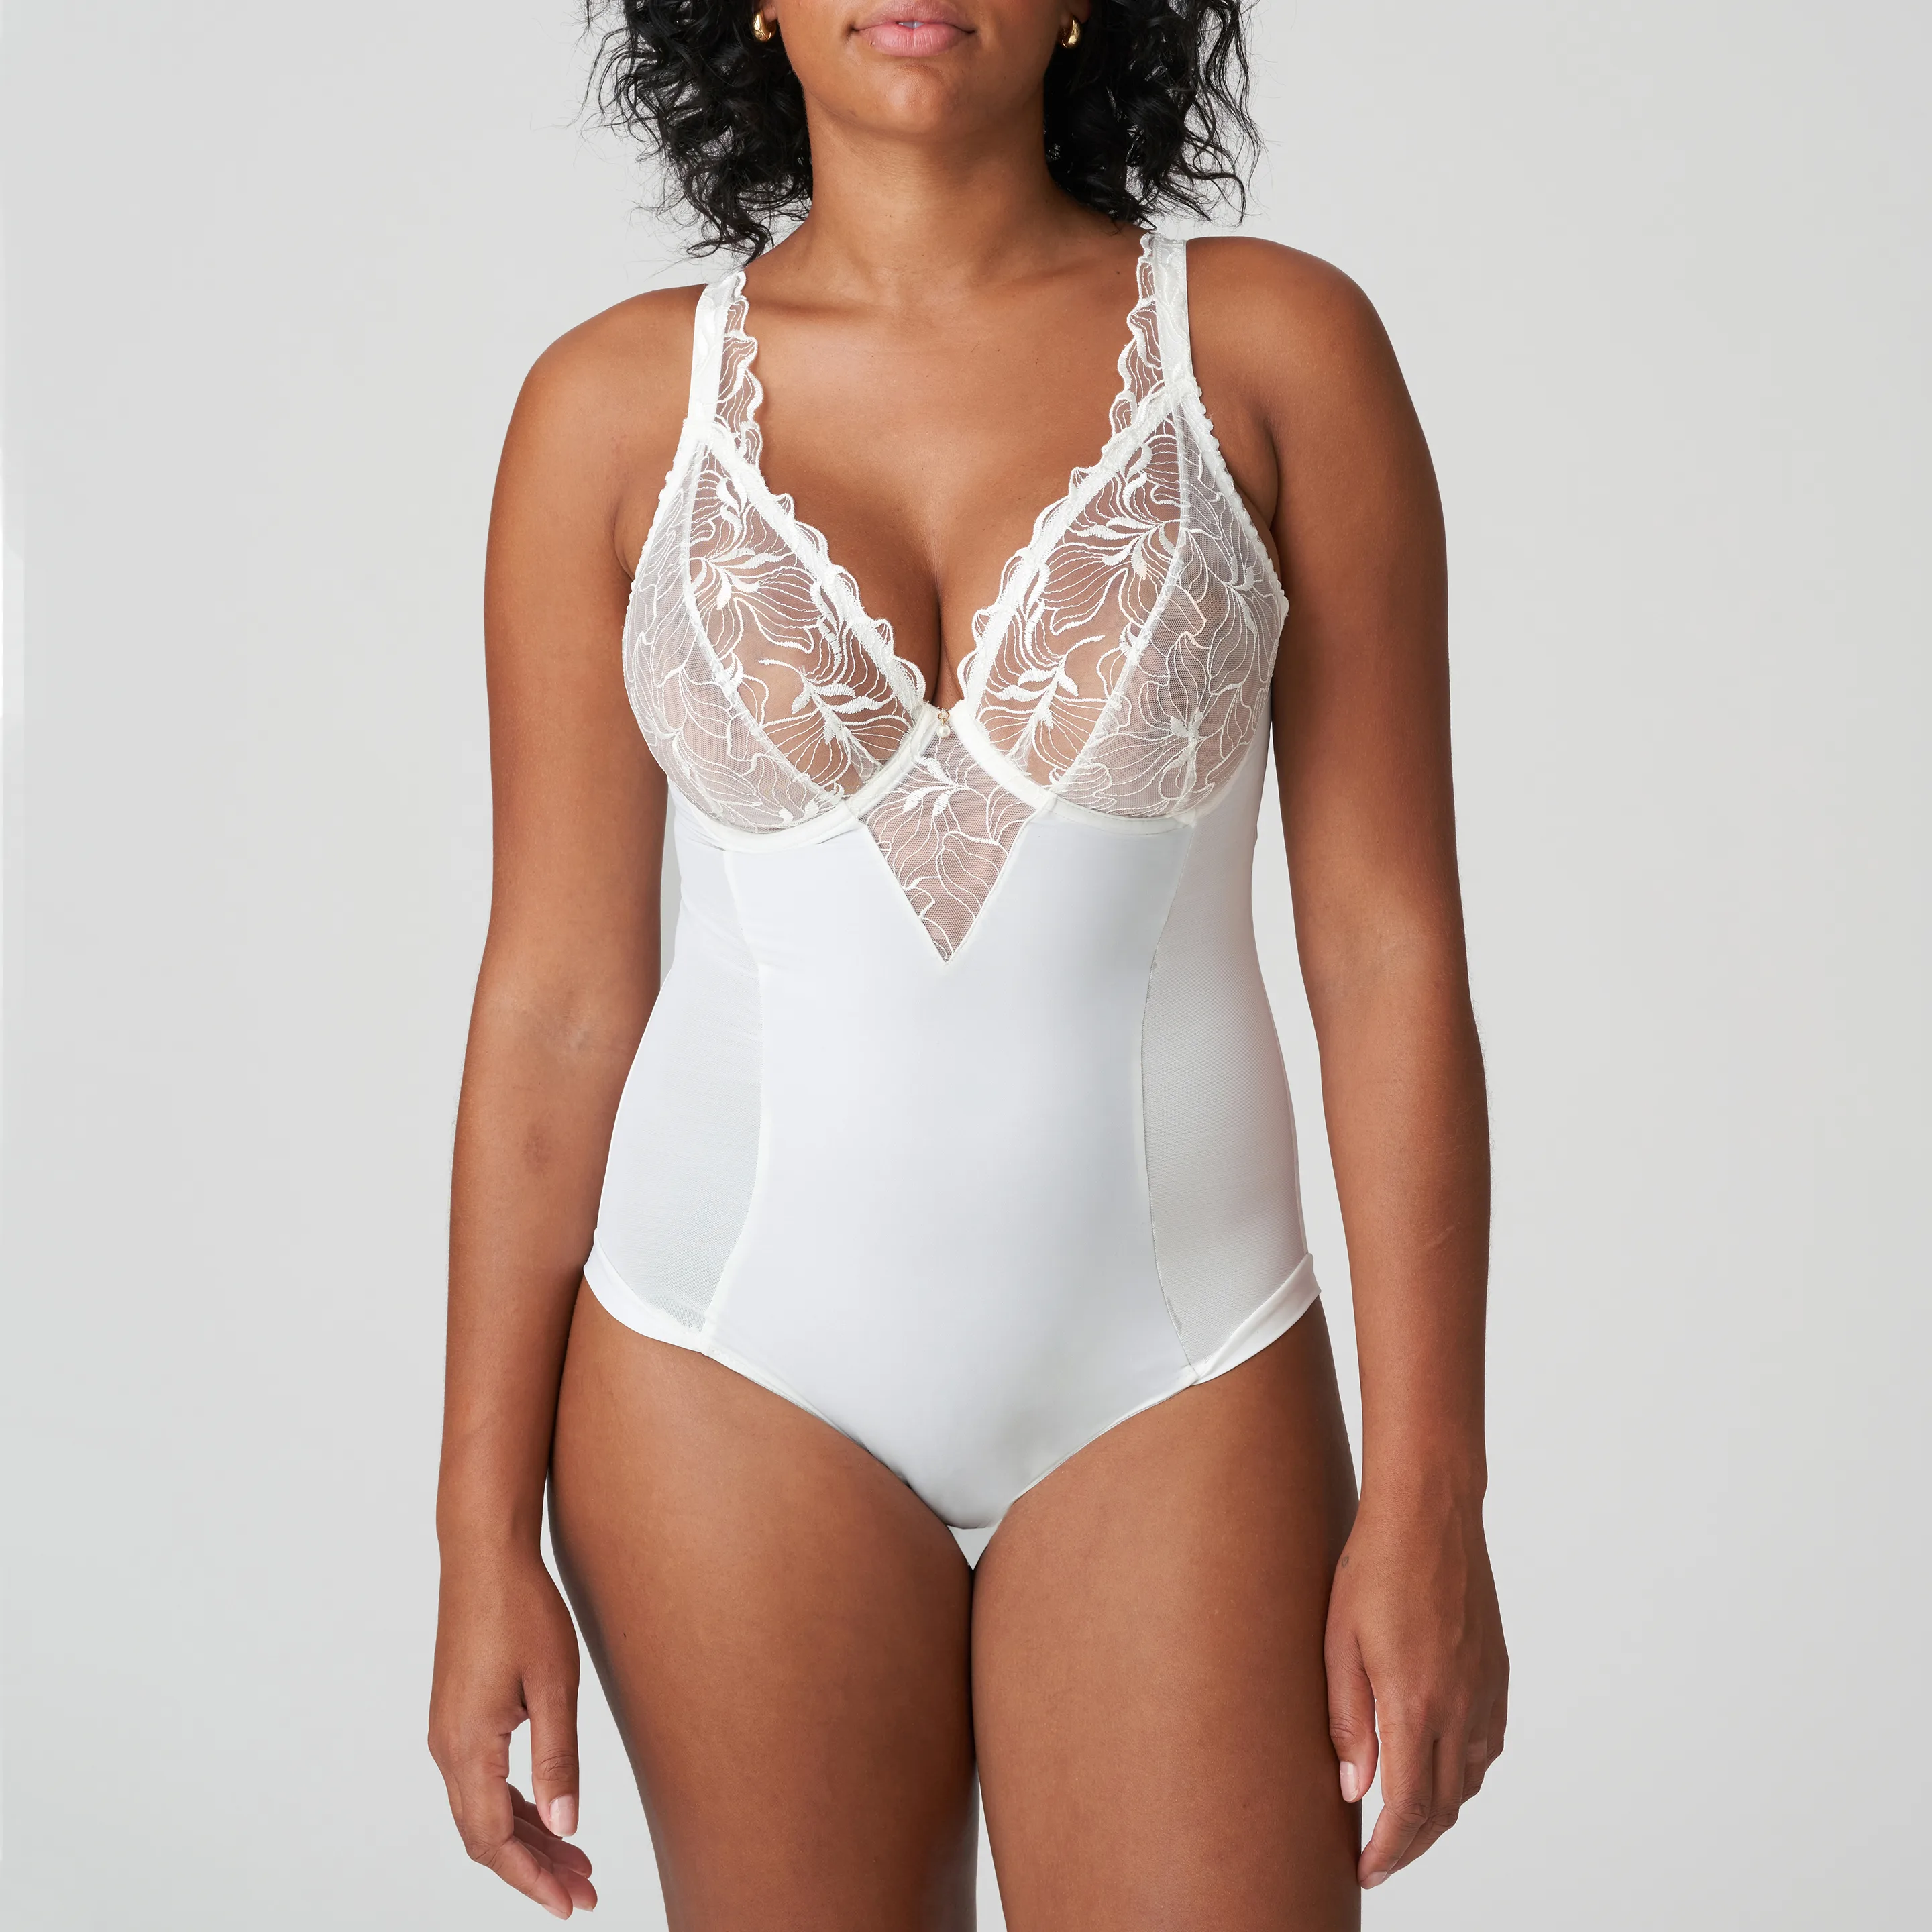 Looking for a bra with excellent support for larger cup sizes? We combine  comfort and style!